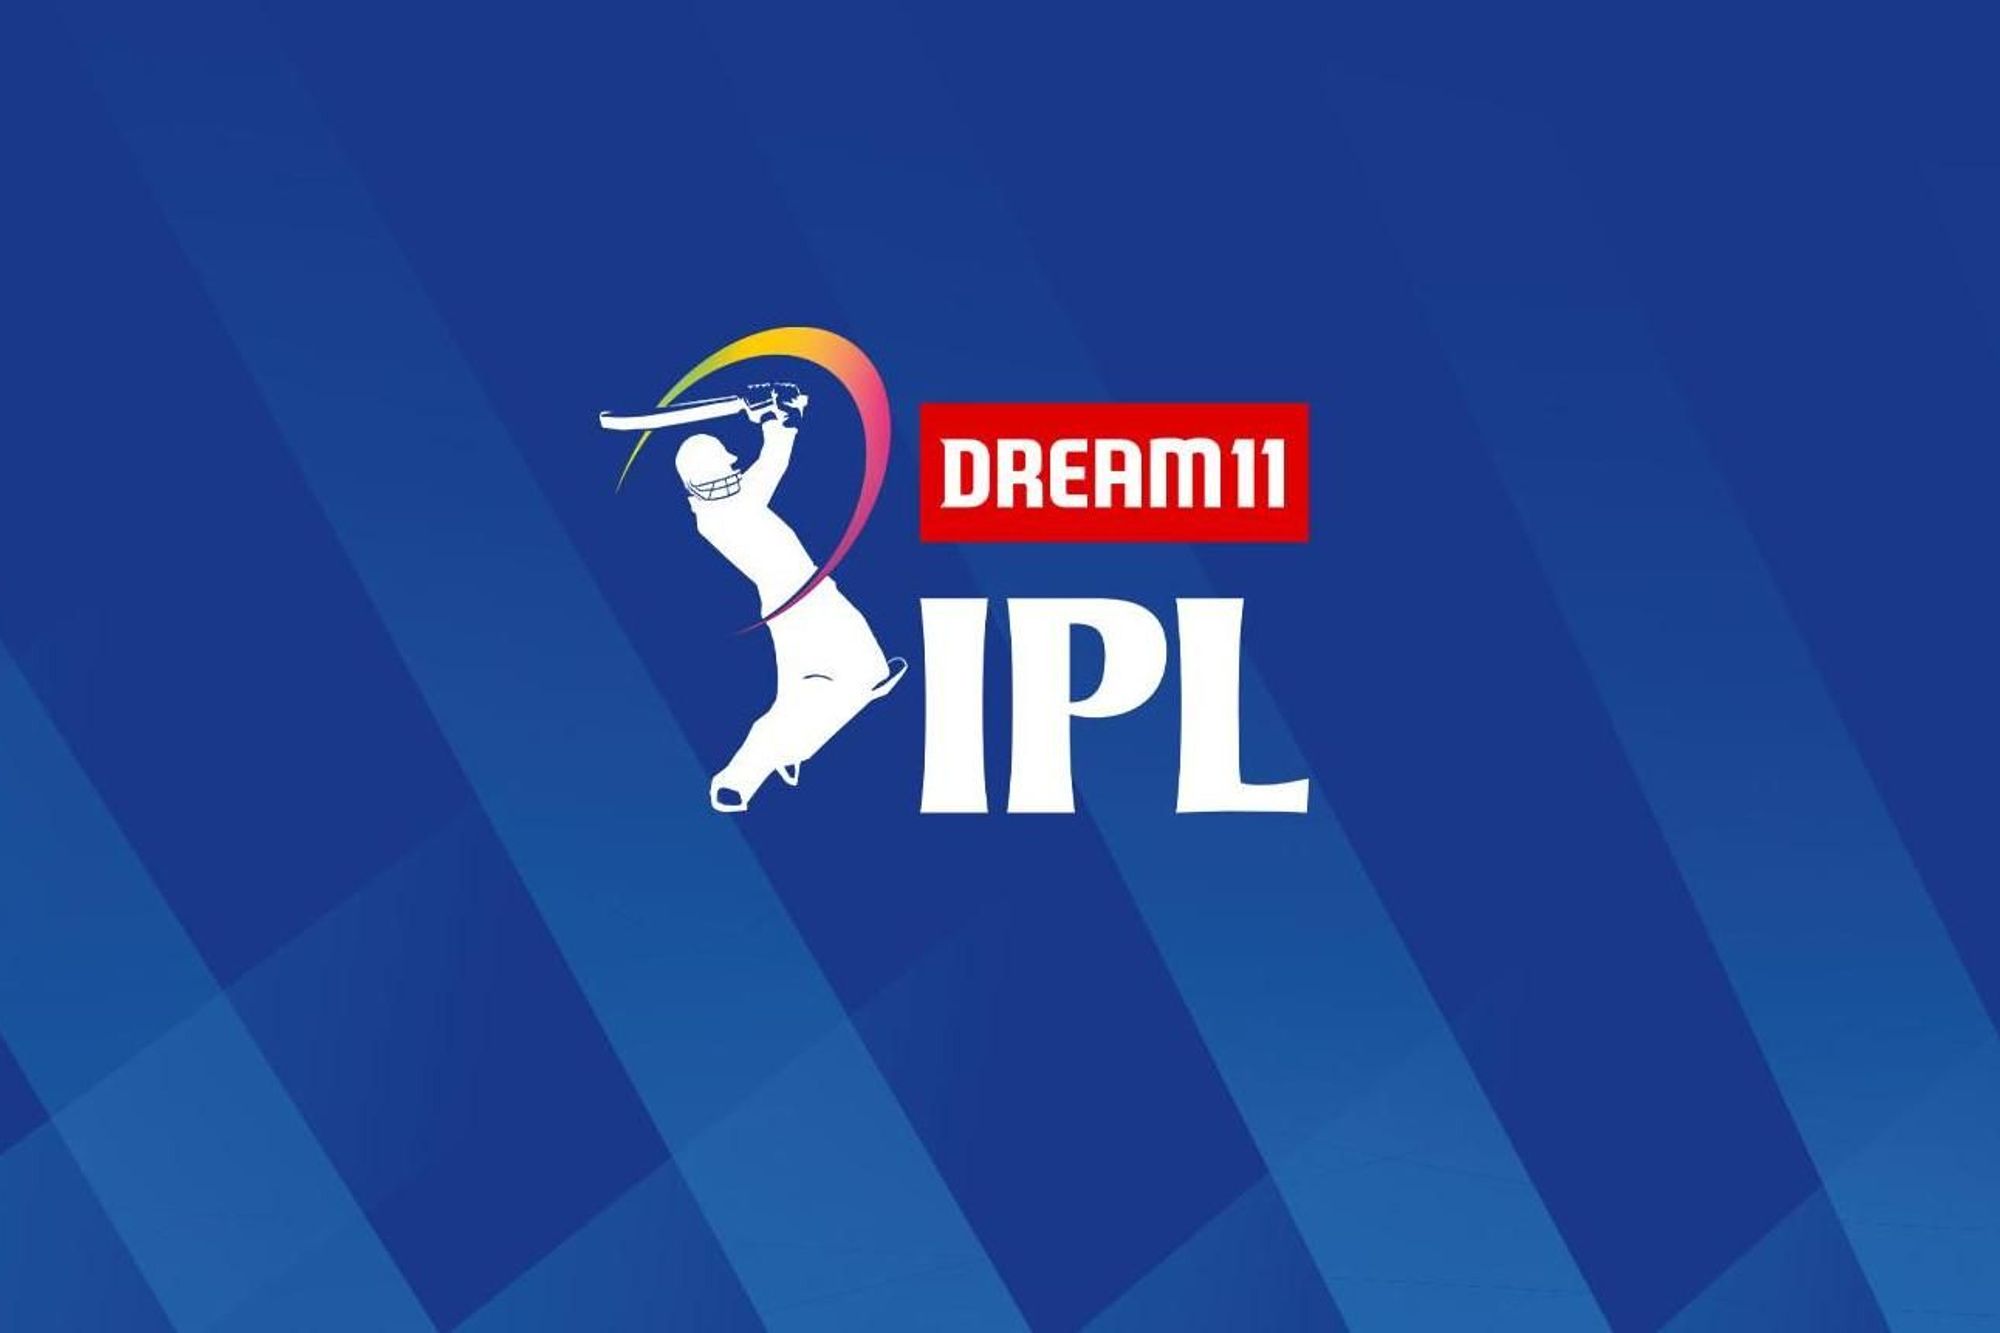 These 3 teams in IPL 2020 playoffs, now the losing teams have to keep good run rate